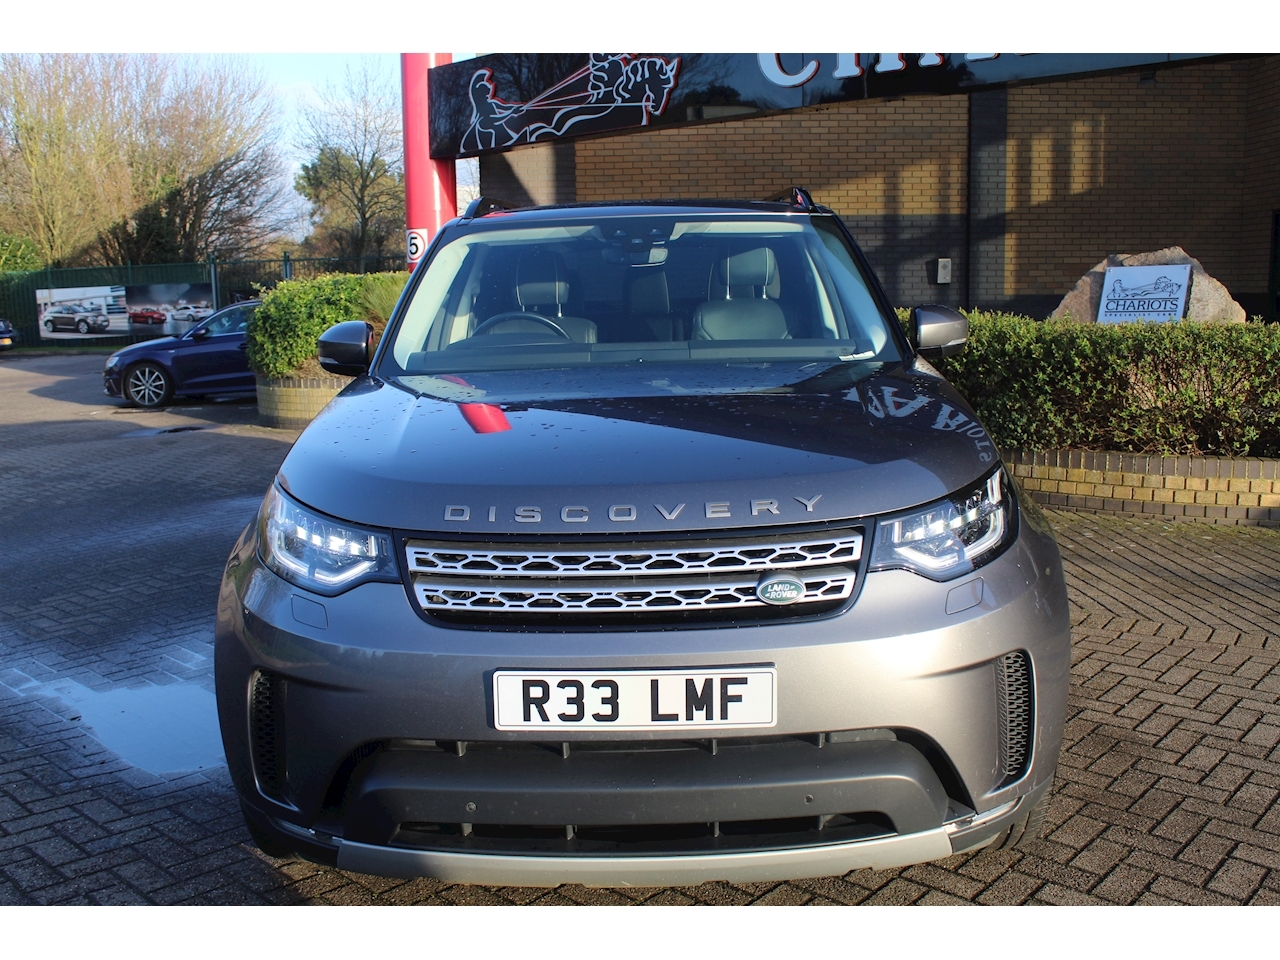 Discovery Td6 Hse Estate 3.0 Automatic Diesel